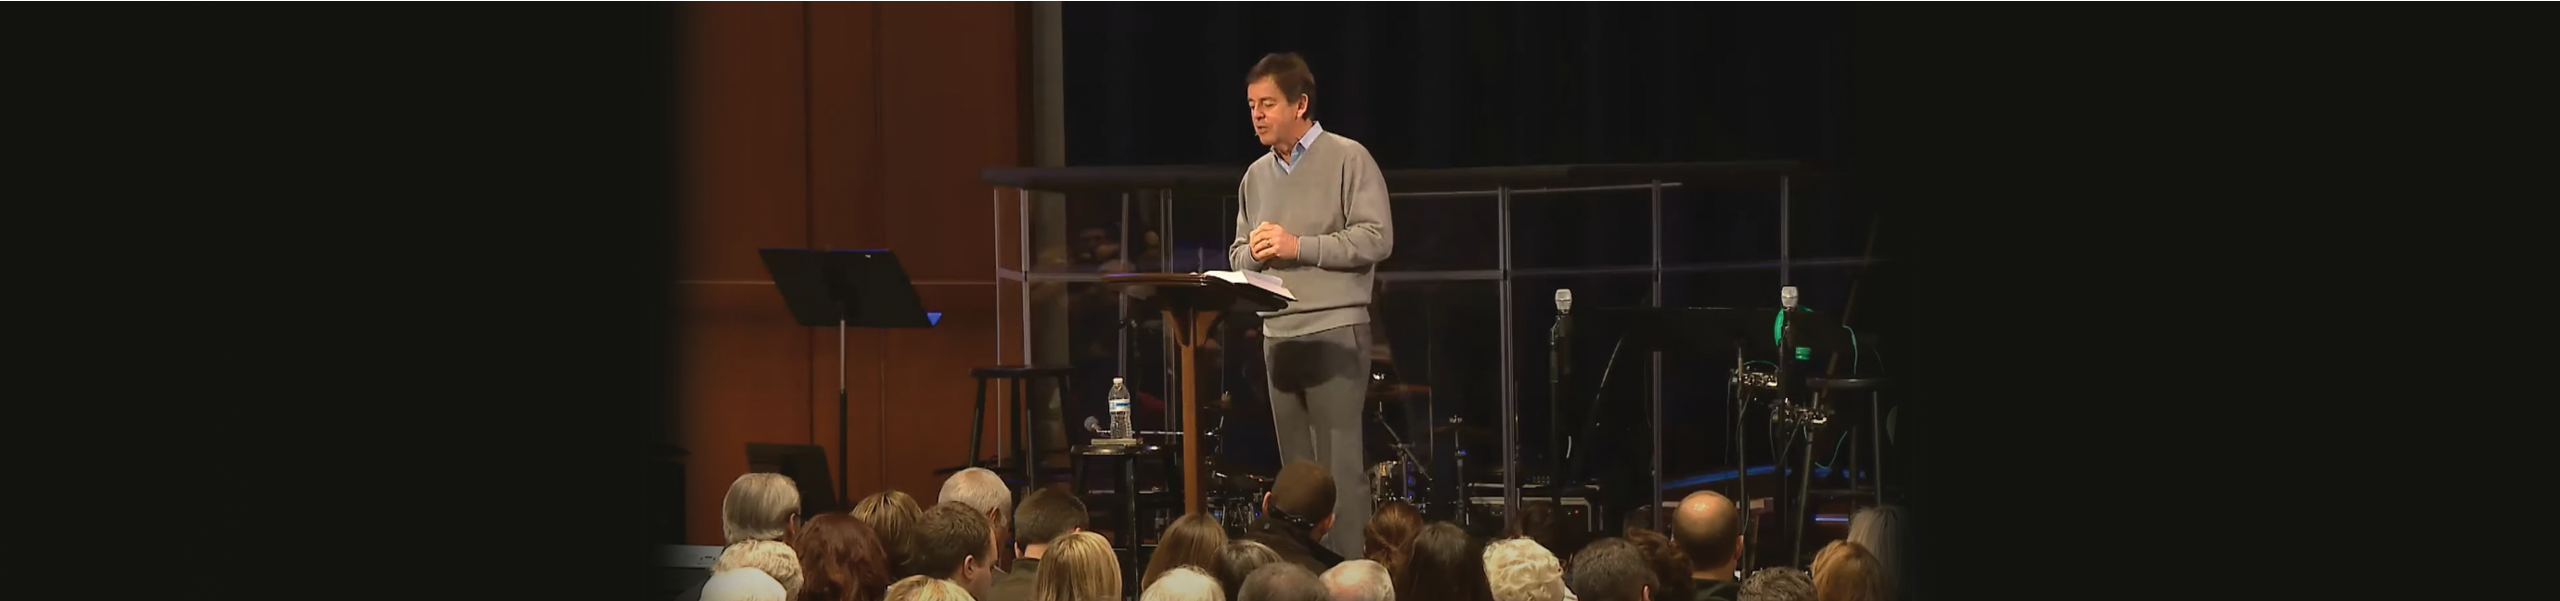 Grace and Peace - Ephesians | Alistair Begg